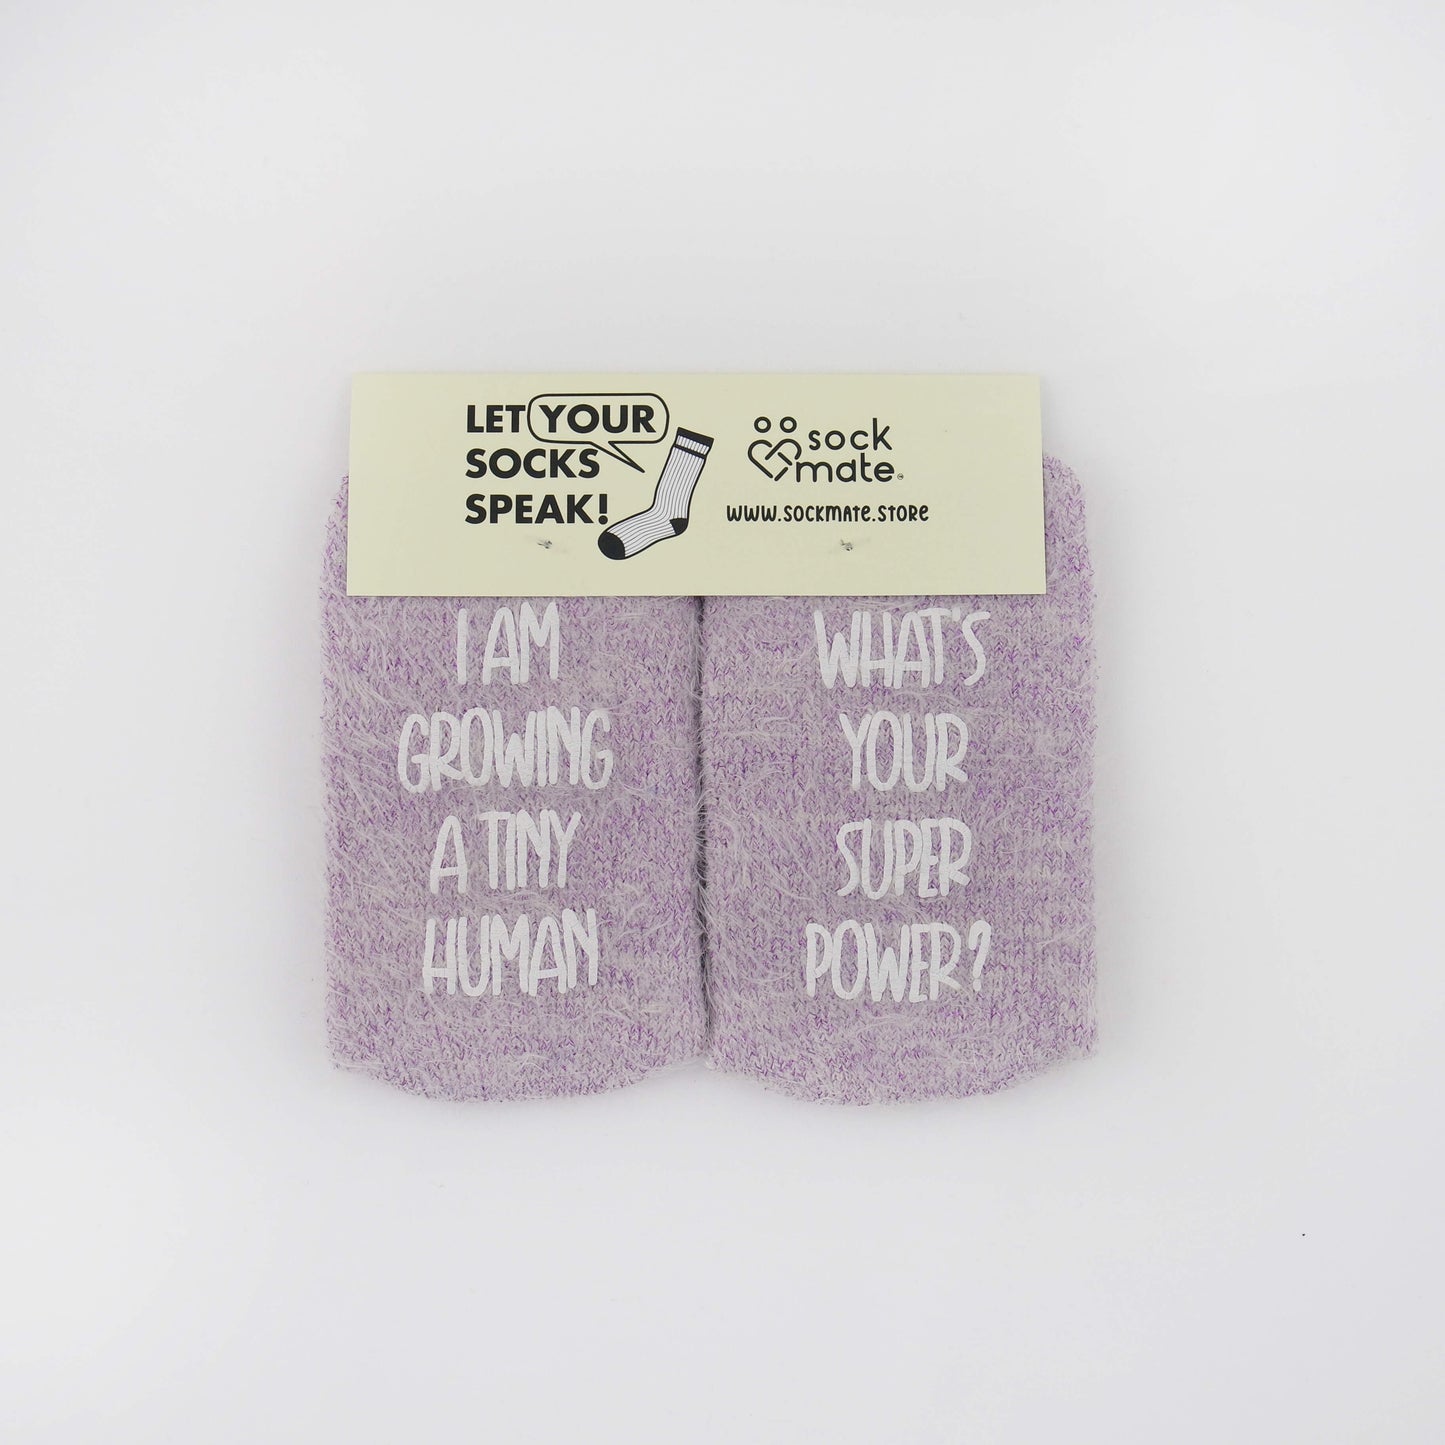 Socks with a humorous message about pregnancy, emphasizing the importance of self-care while growing a tiny human.